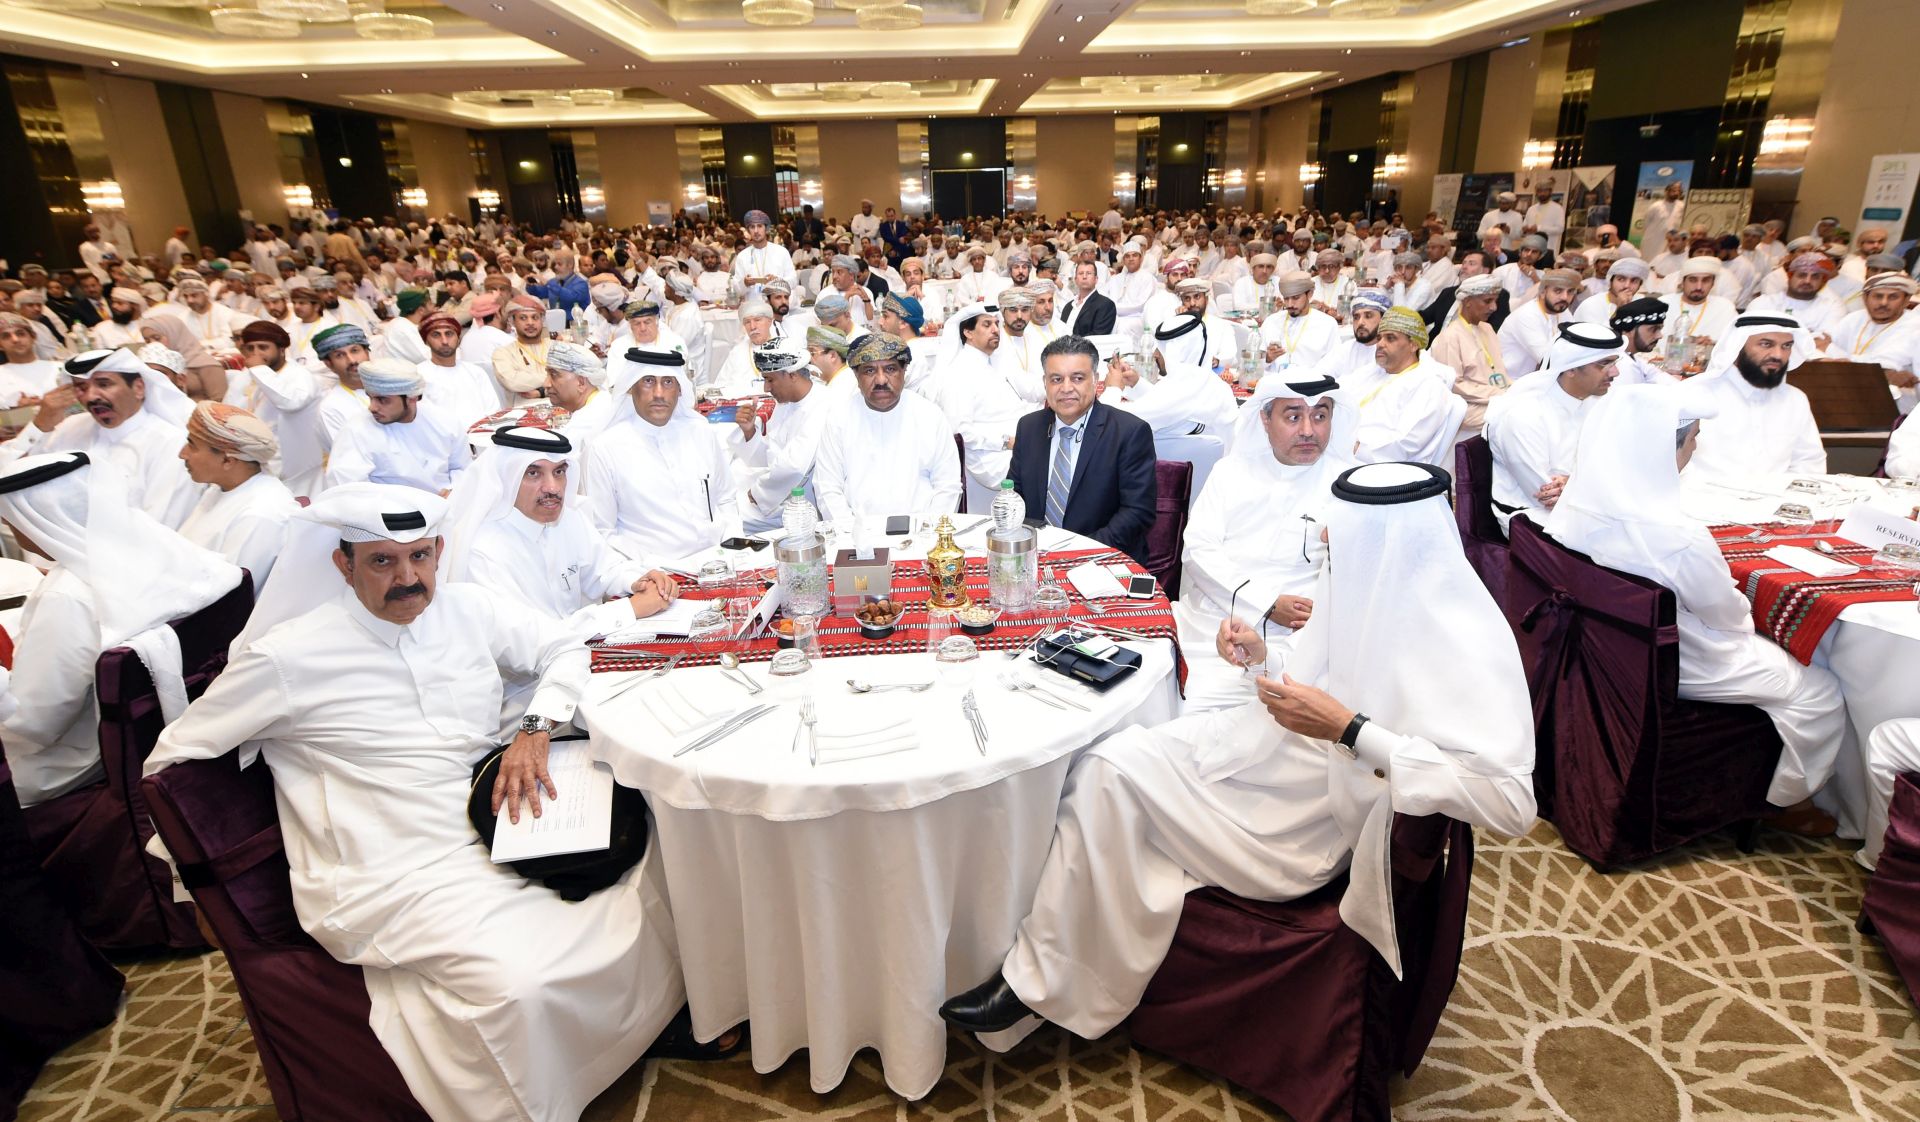 epa06039738 Participants attend a bilateral meeting between businessmen from the State of Qatar and Oman at the Grand Millennium Hotel in Muscat, Oman, 20 June 2017 to discuss ways of cooperation in the economic fields after the opening of shipping lines from the Sultanate of Oman and the State of Qatar in the wake of the events that took place in the GCC countries.  EPA/HAMID AL-QASIMI